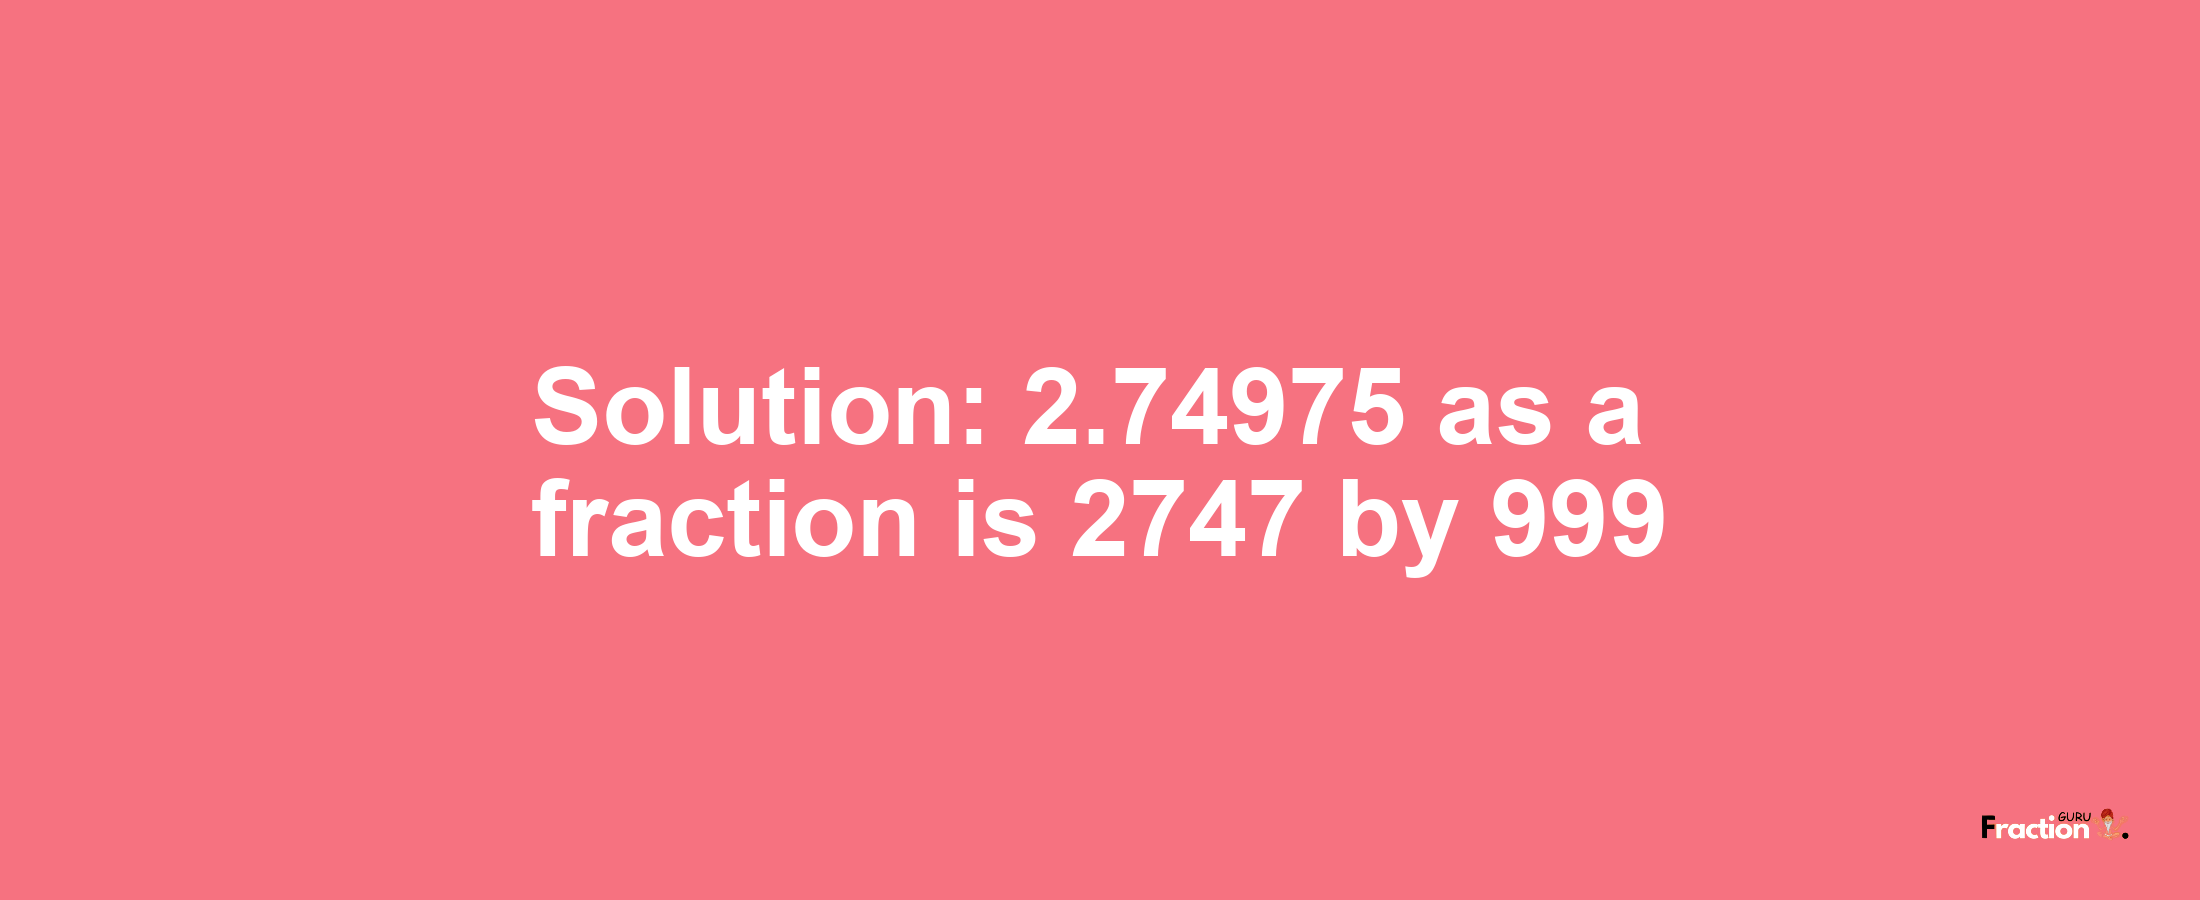 Solution:2.74975 as a fraction is 2747/999